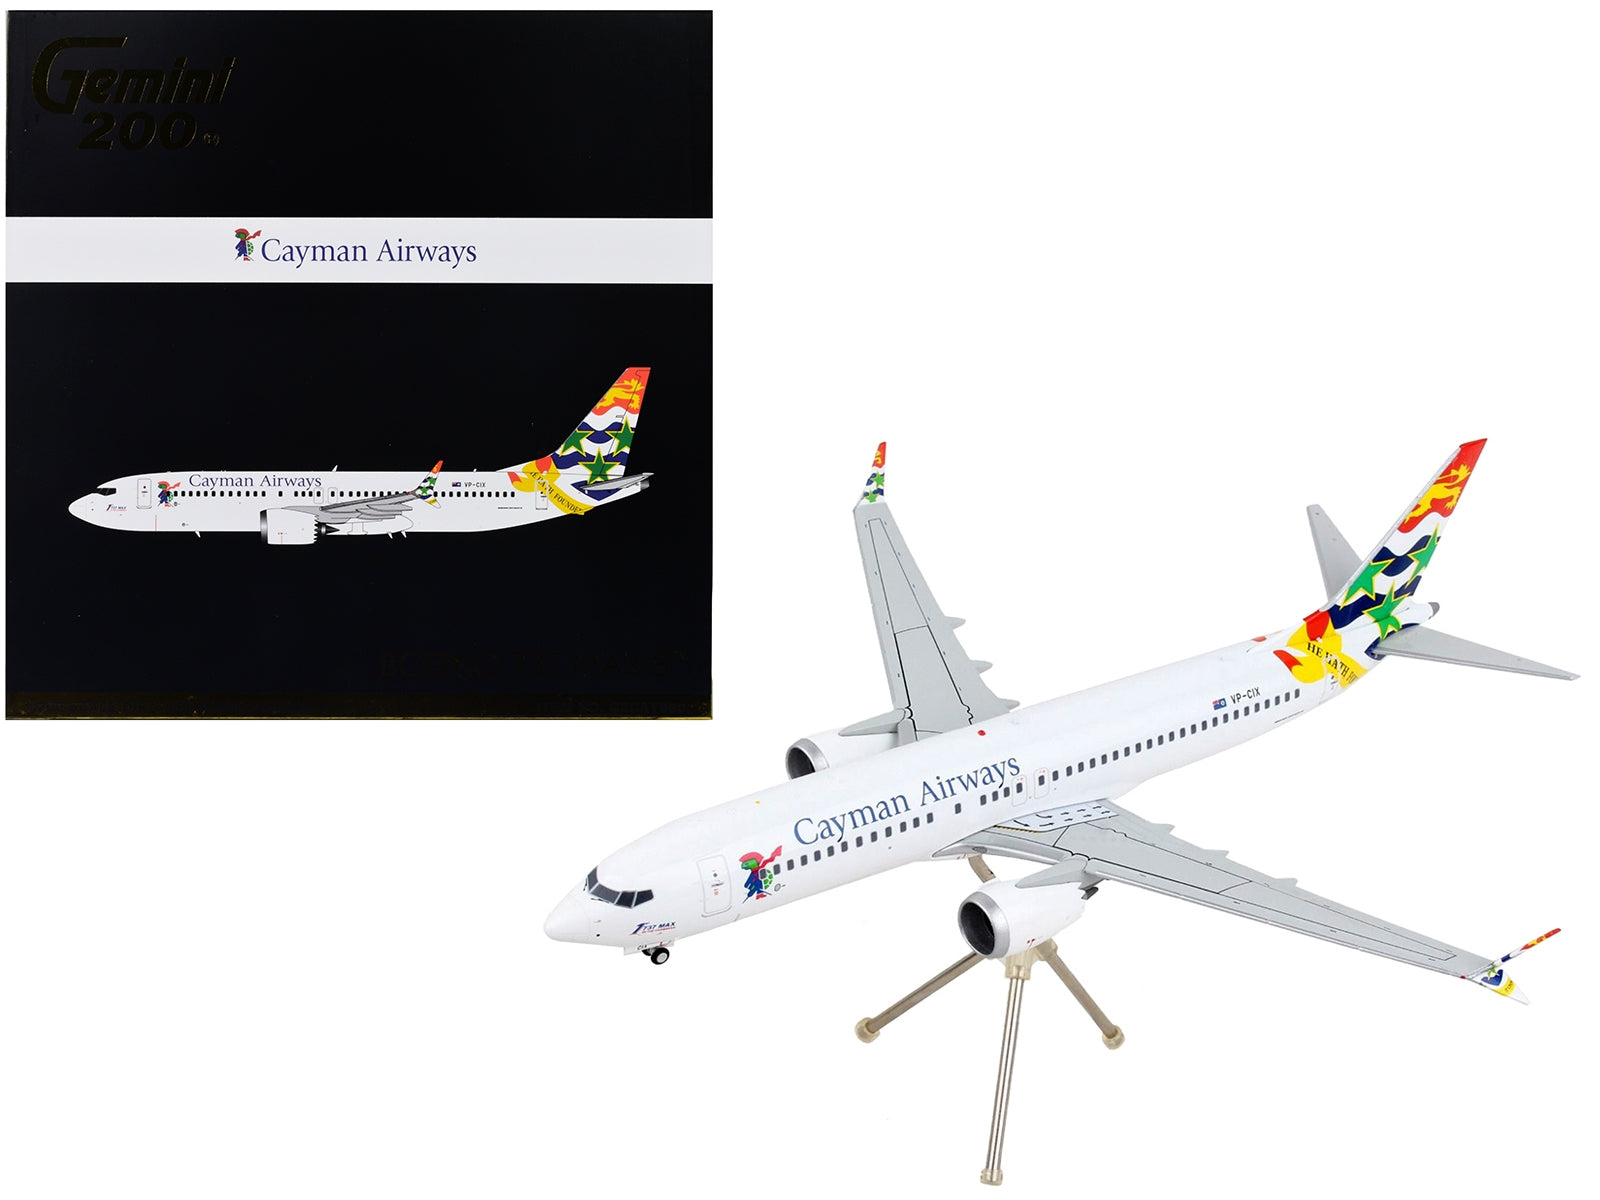 Boeing 737 MAX 8 Commercial Aircraft "Cayman Airways" White with Tail Graphics "Gemini 200" Series 1/200 Diecast Model Airplane by GeminiJets